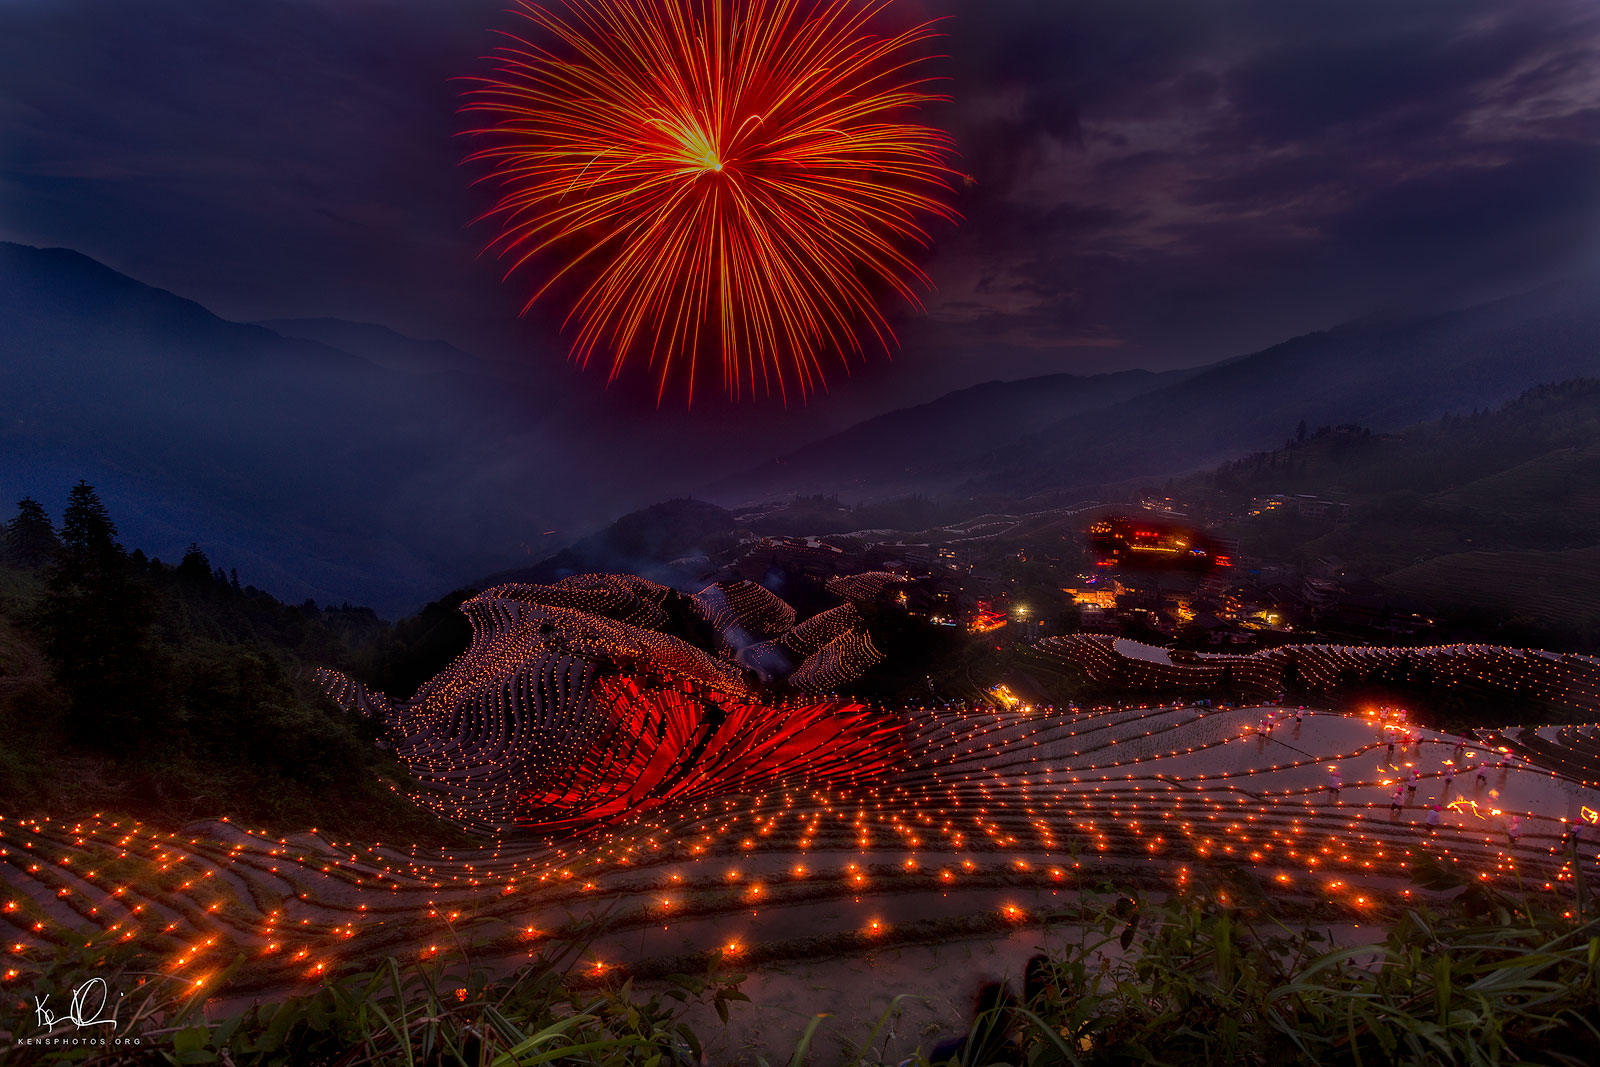   GUILIN CHINA. &nbsp;FIREWORKS AND CANDLES LIGHT UP RICE TERRACES.  